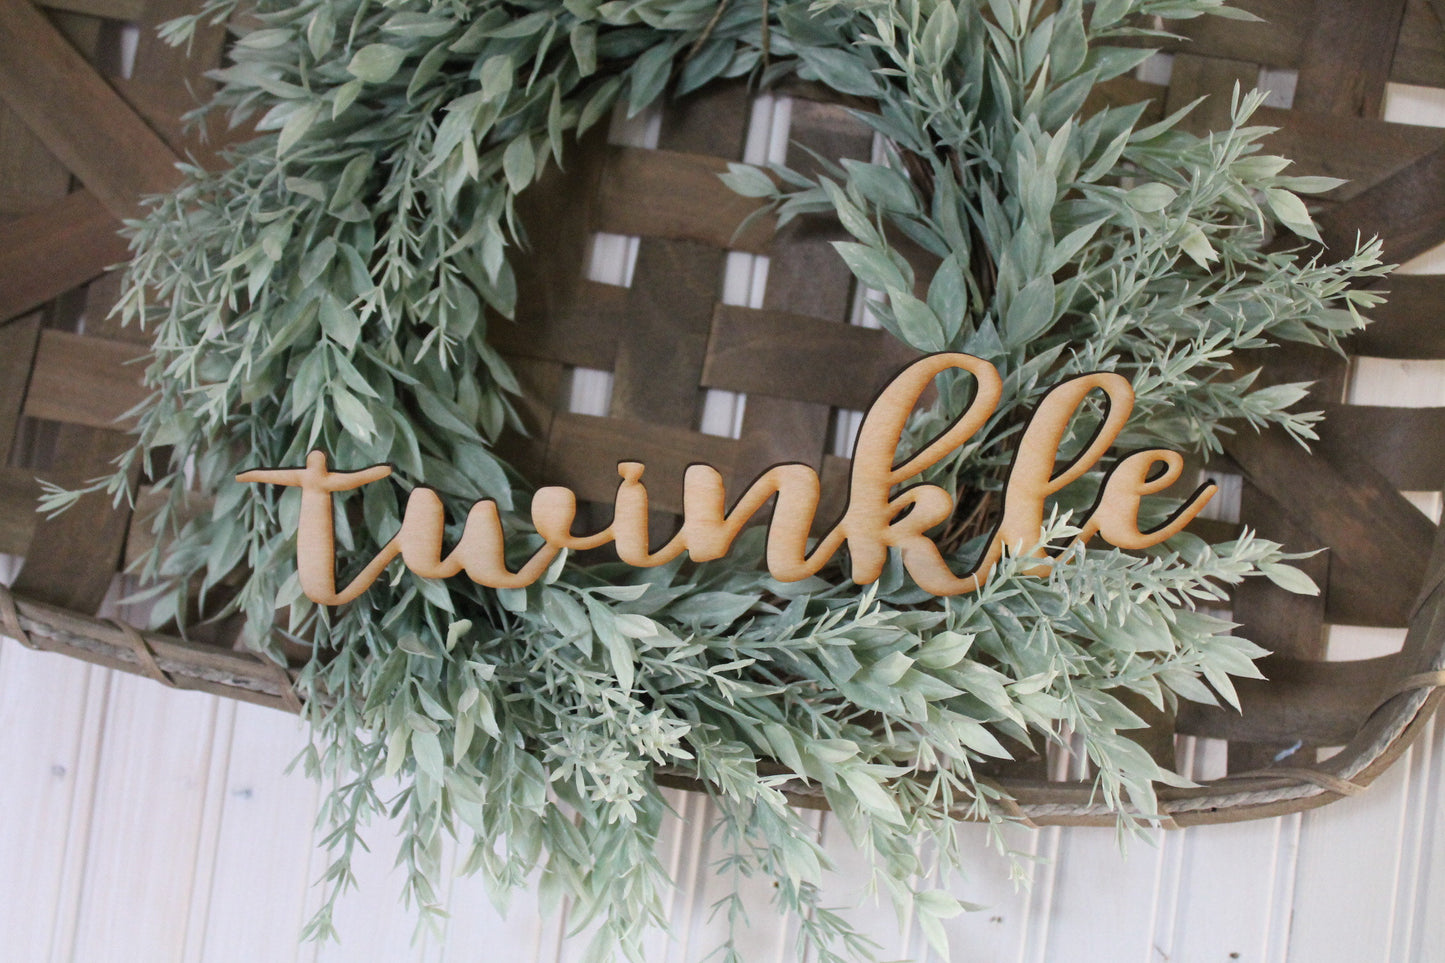 Twinkle, Laser Cut Out, Twinkle Sign, Twinkle Cutout, Twinkle DIY, Christmas, Wood Word, Craft, Laser Cut Wood Word, Wooden, Decor